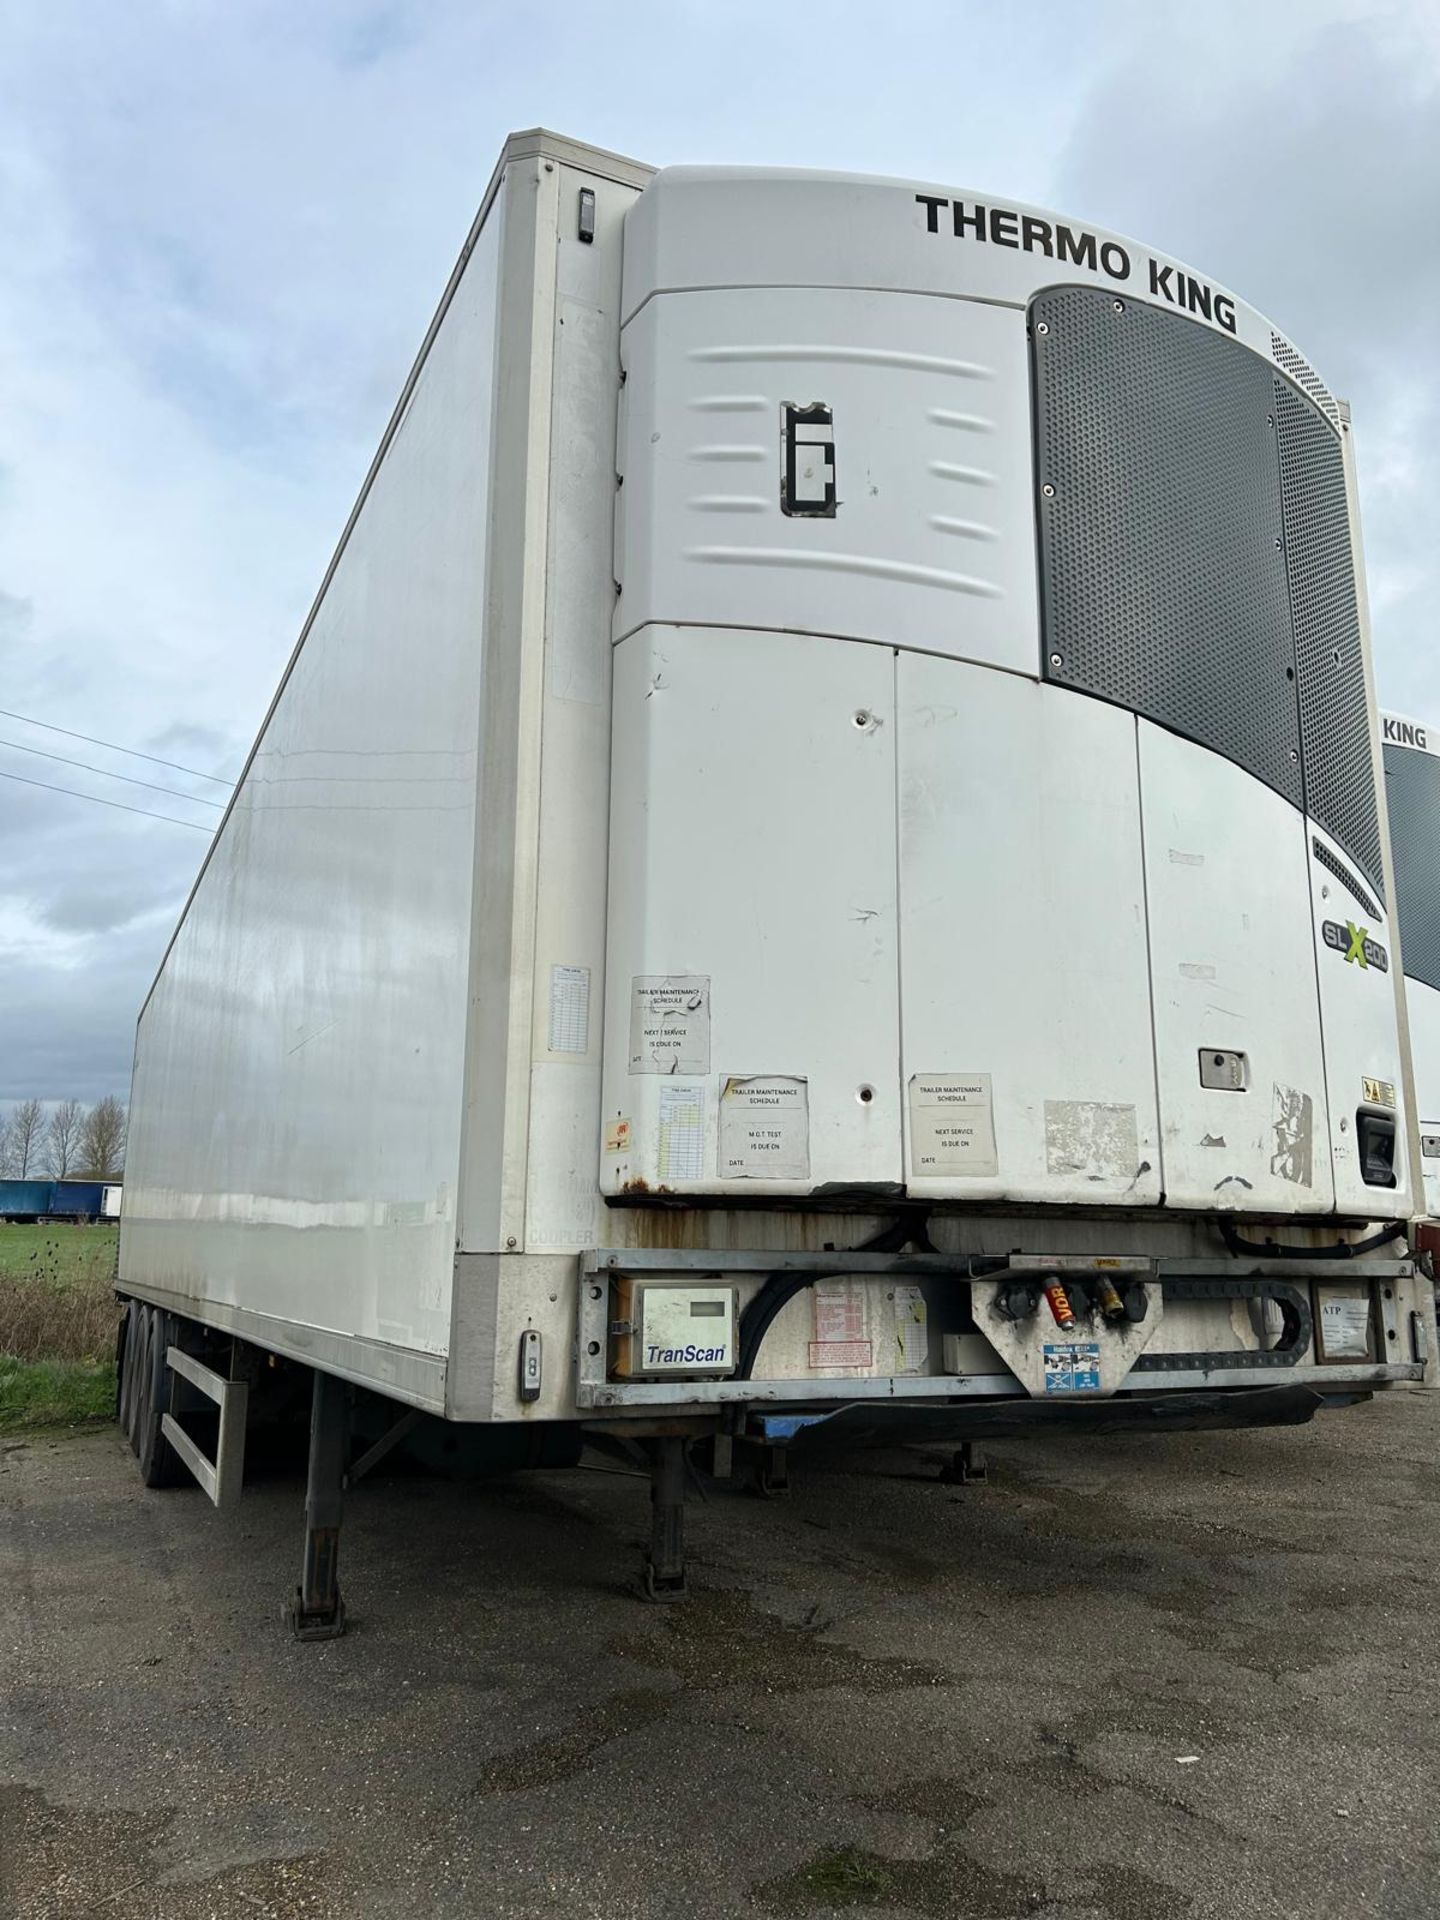 EF082 – 2009 Montracon 13.6m Refrigerated Trailer - Image 2 of 9